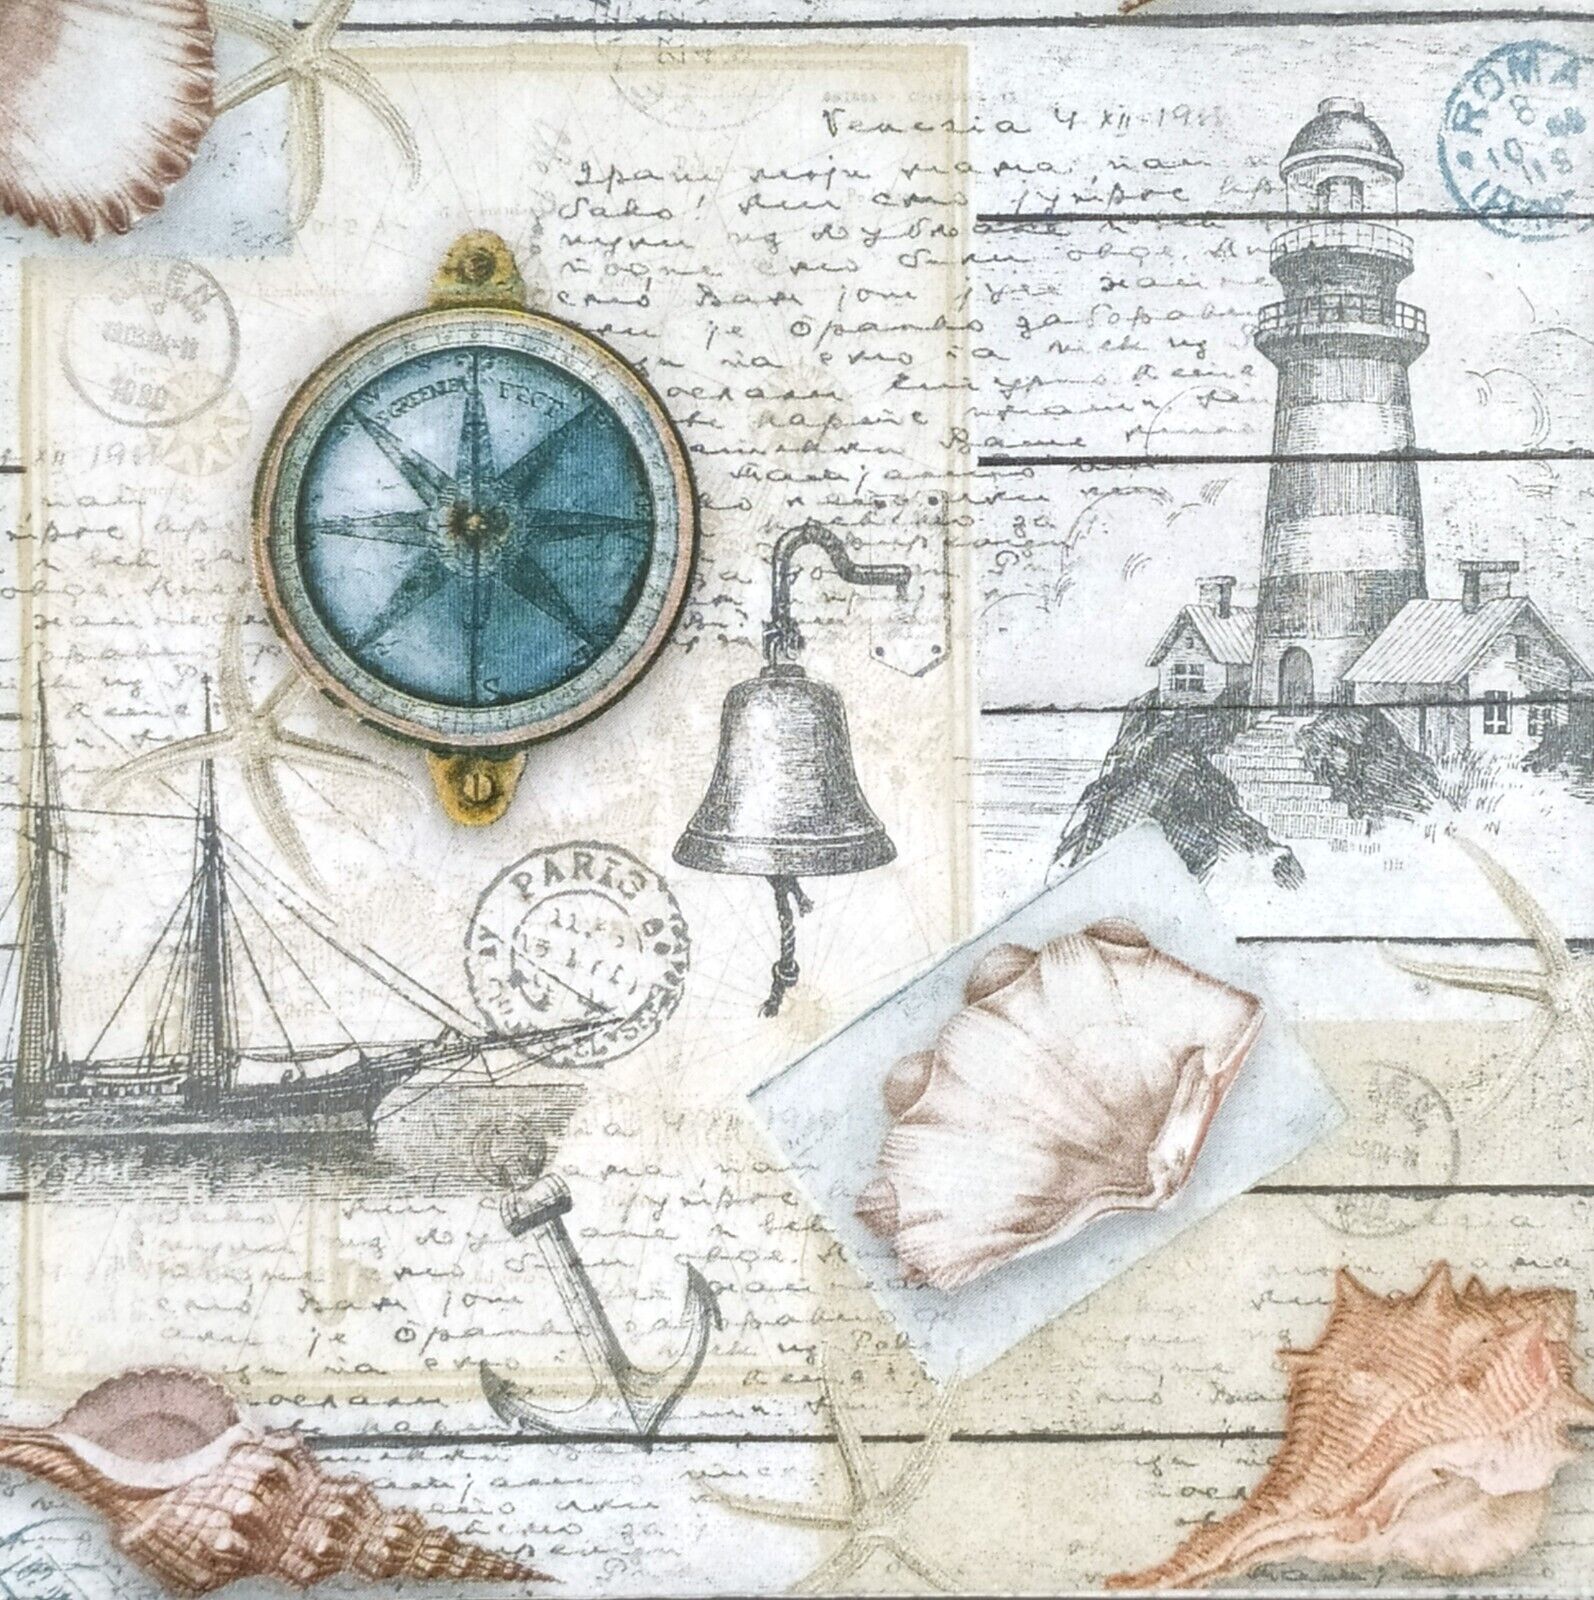 Shop Decoupage Craft Paper Napkin for Mixed Media, Scrapbooking